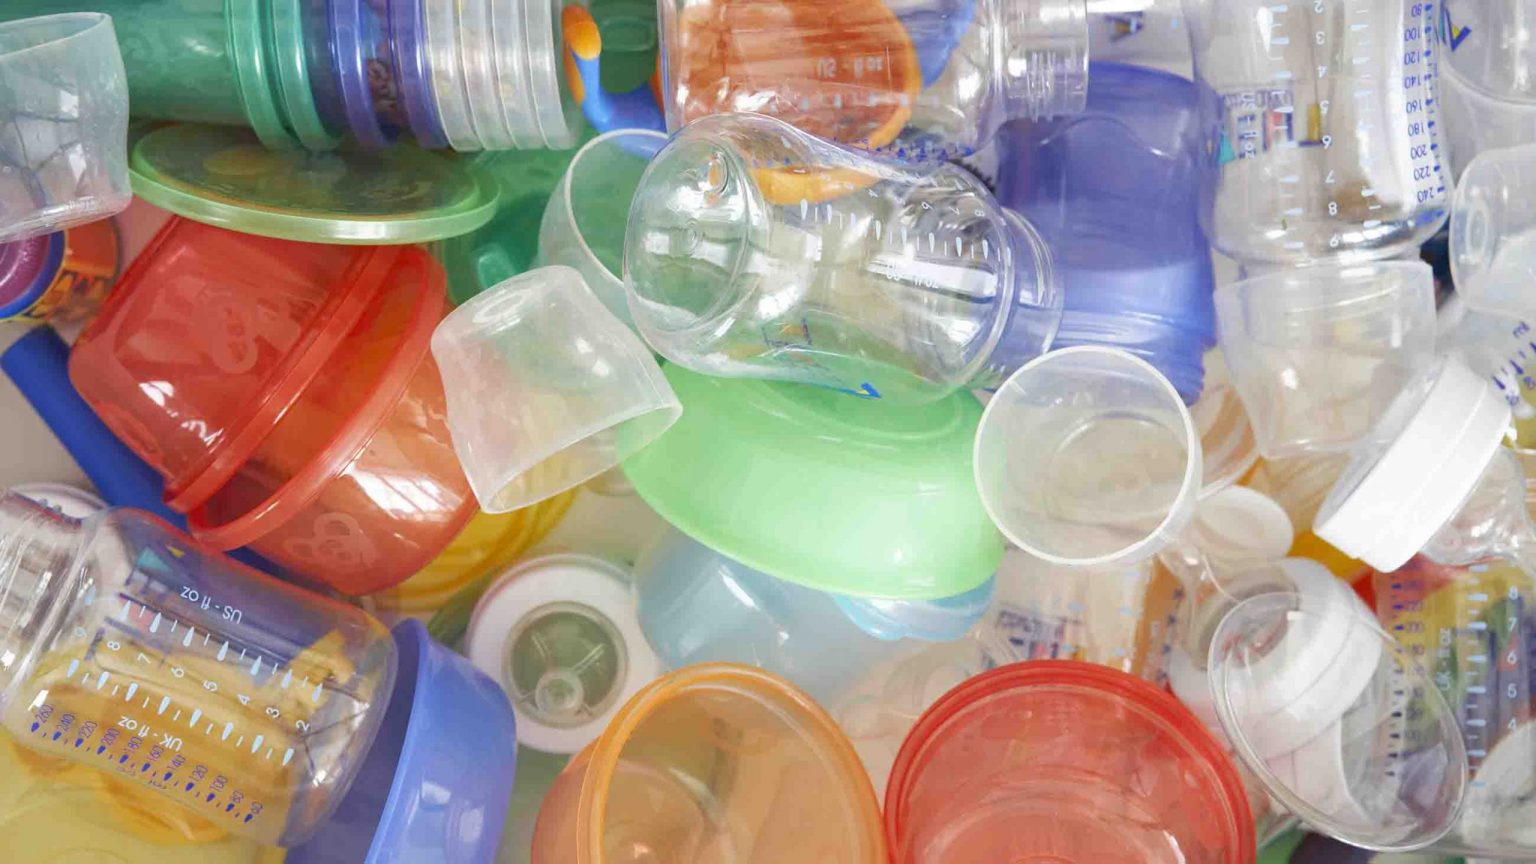 What is BPA, and what are the concerns about BPA?